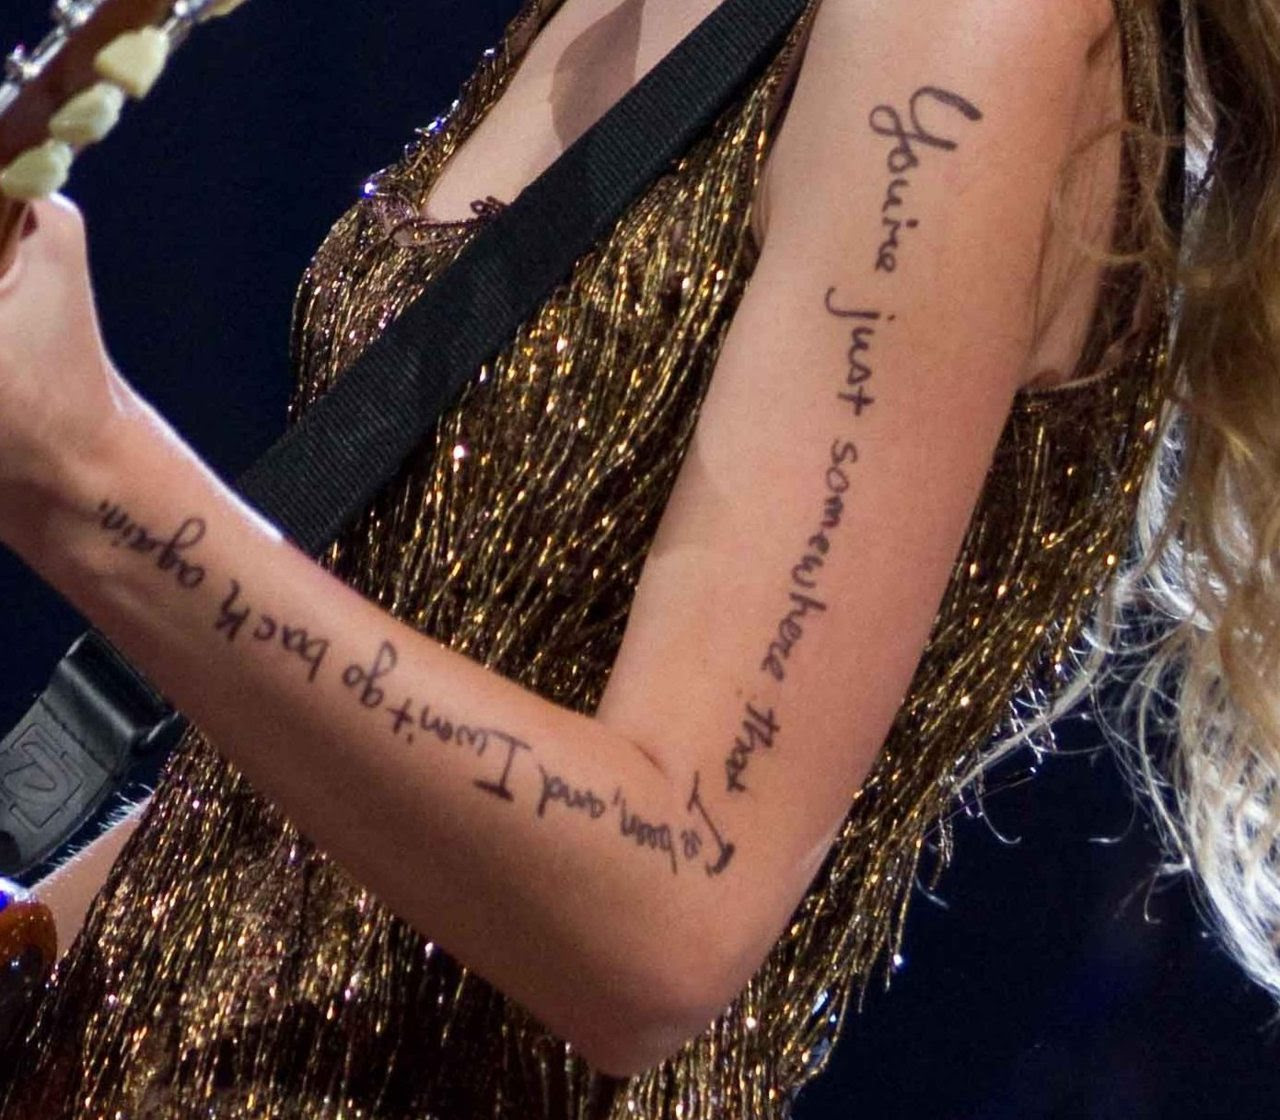 taylor swift writes on her arm